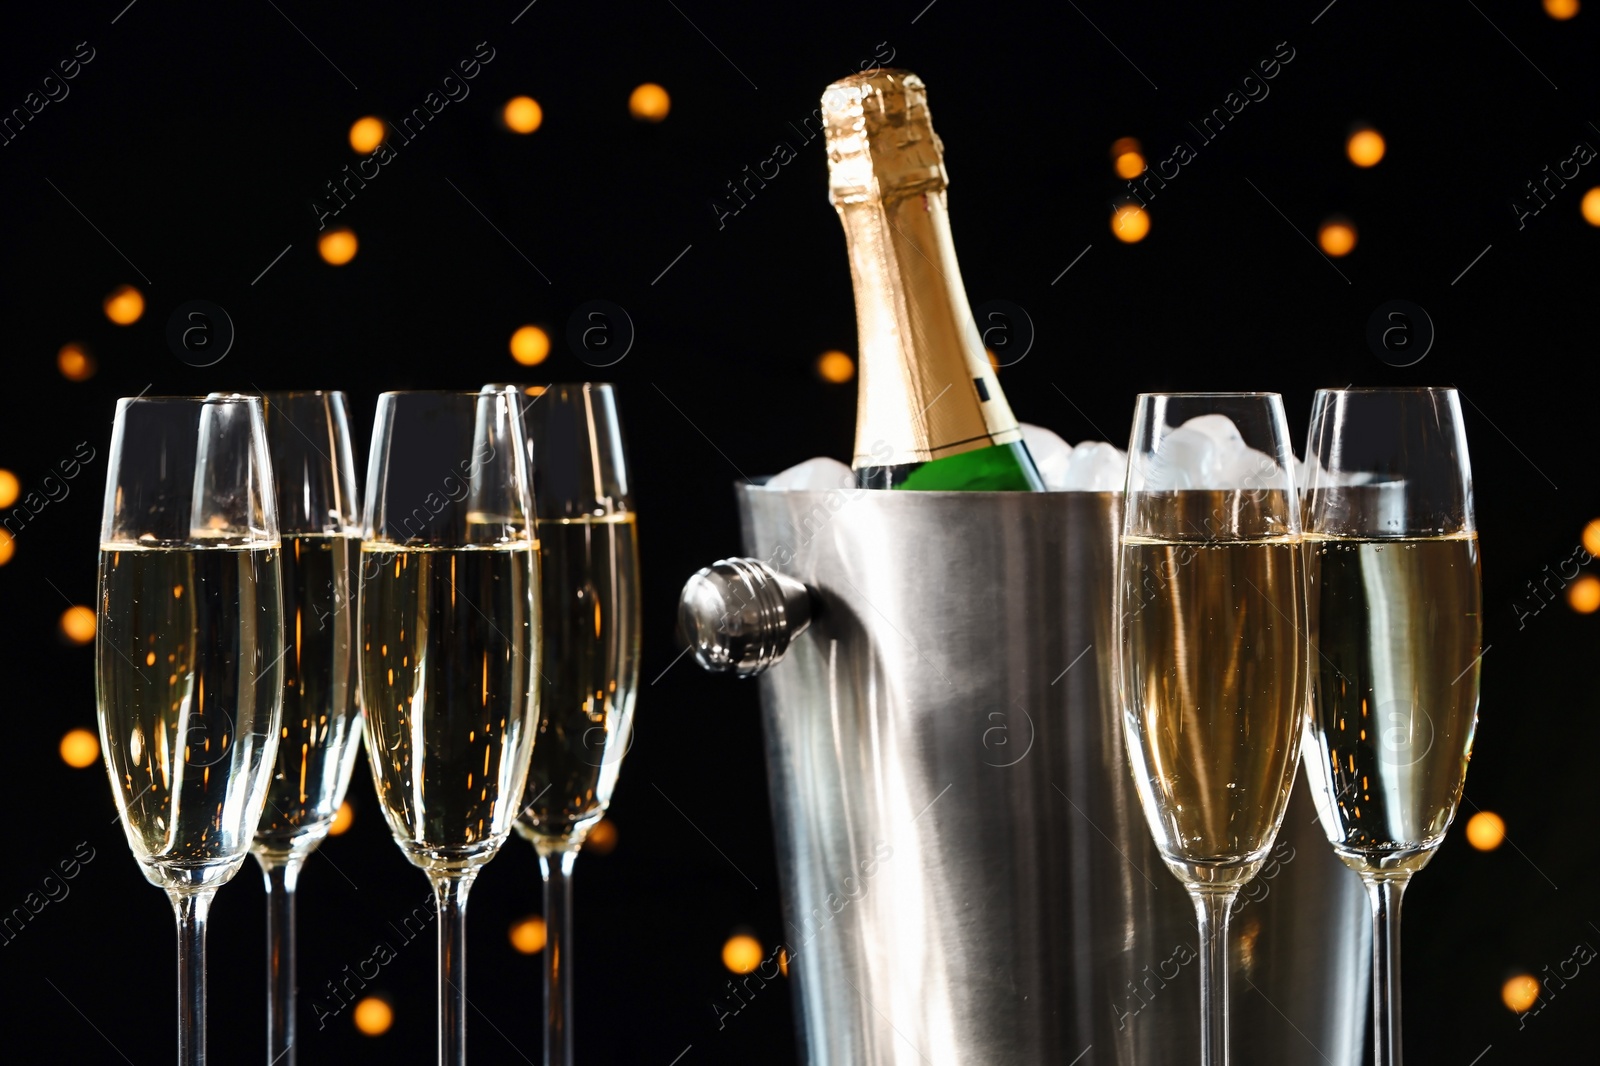 Photo of Glasses with champagne and bottle in bucket against blurred lights